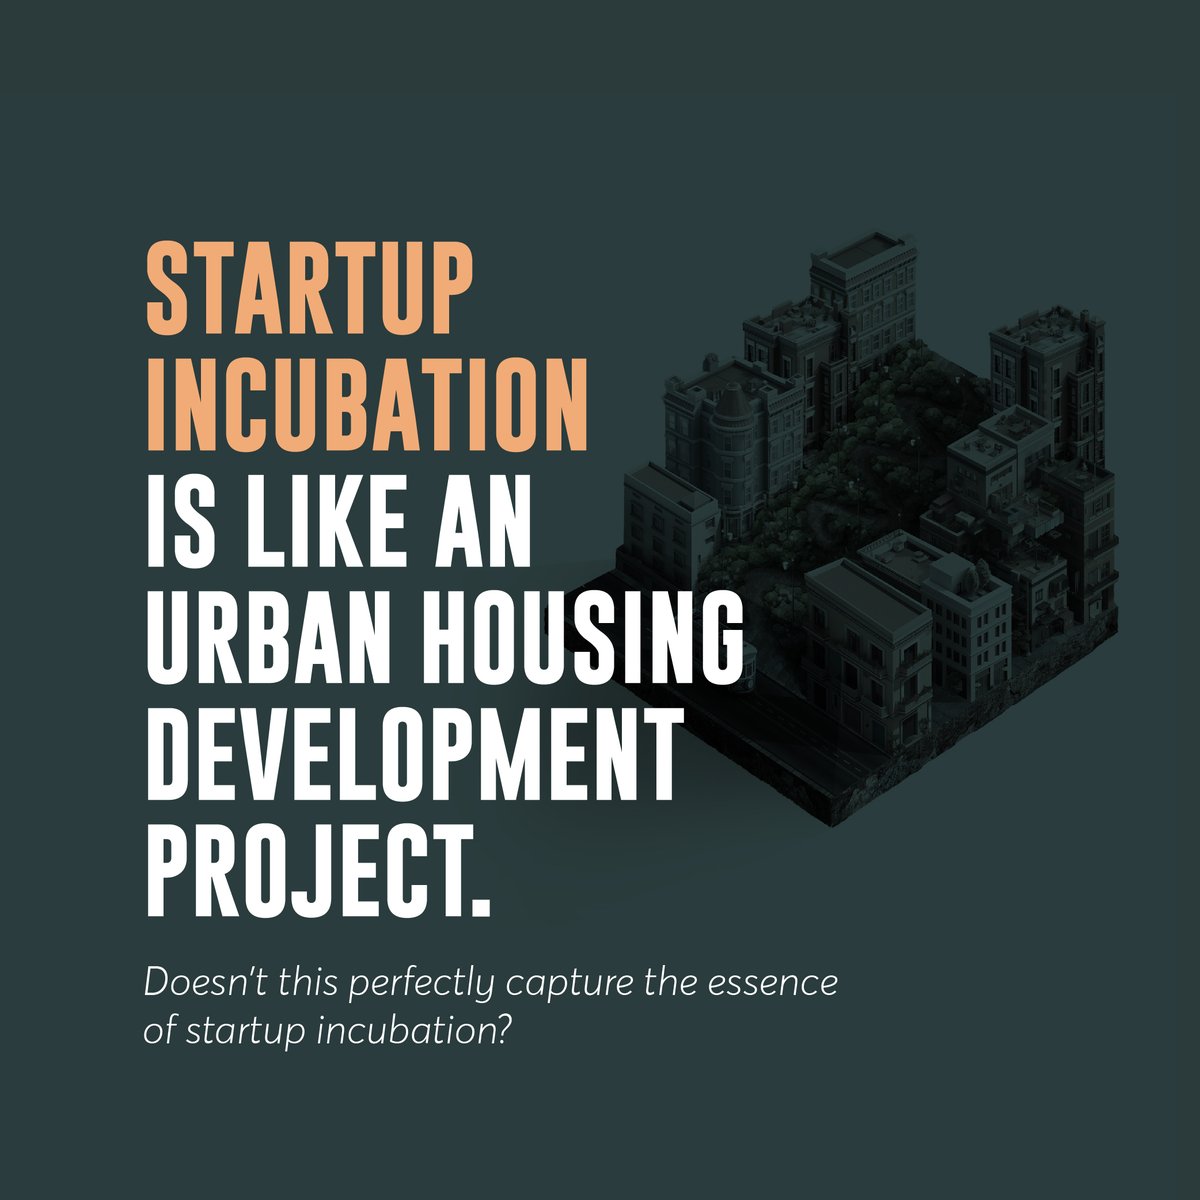 During a recent biotech seminar, I was intrigued by Michael Alvarez's analogy comparing incubation to an urban housing development project. Doesn't this perfectly capture the essence of startup incubation? Read more here. bit.ly/3SS76bD